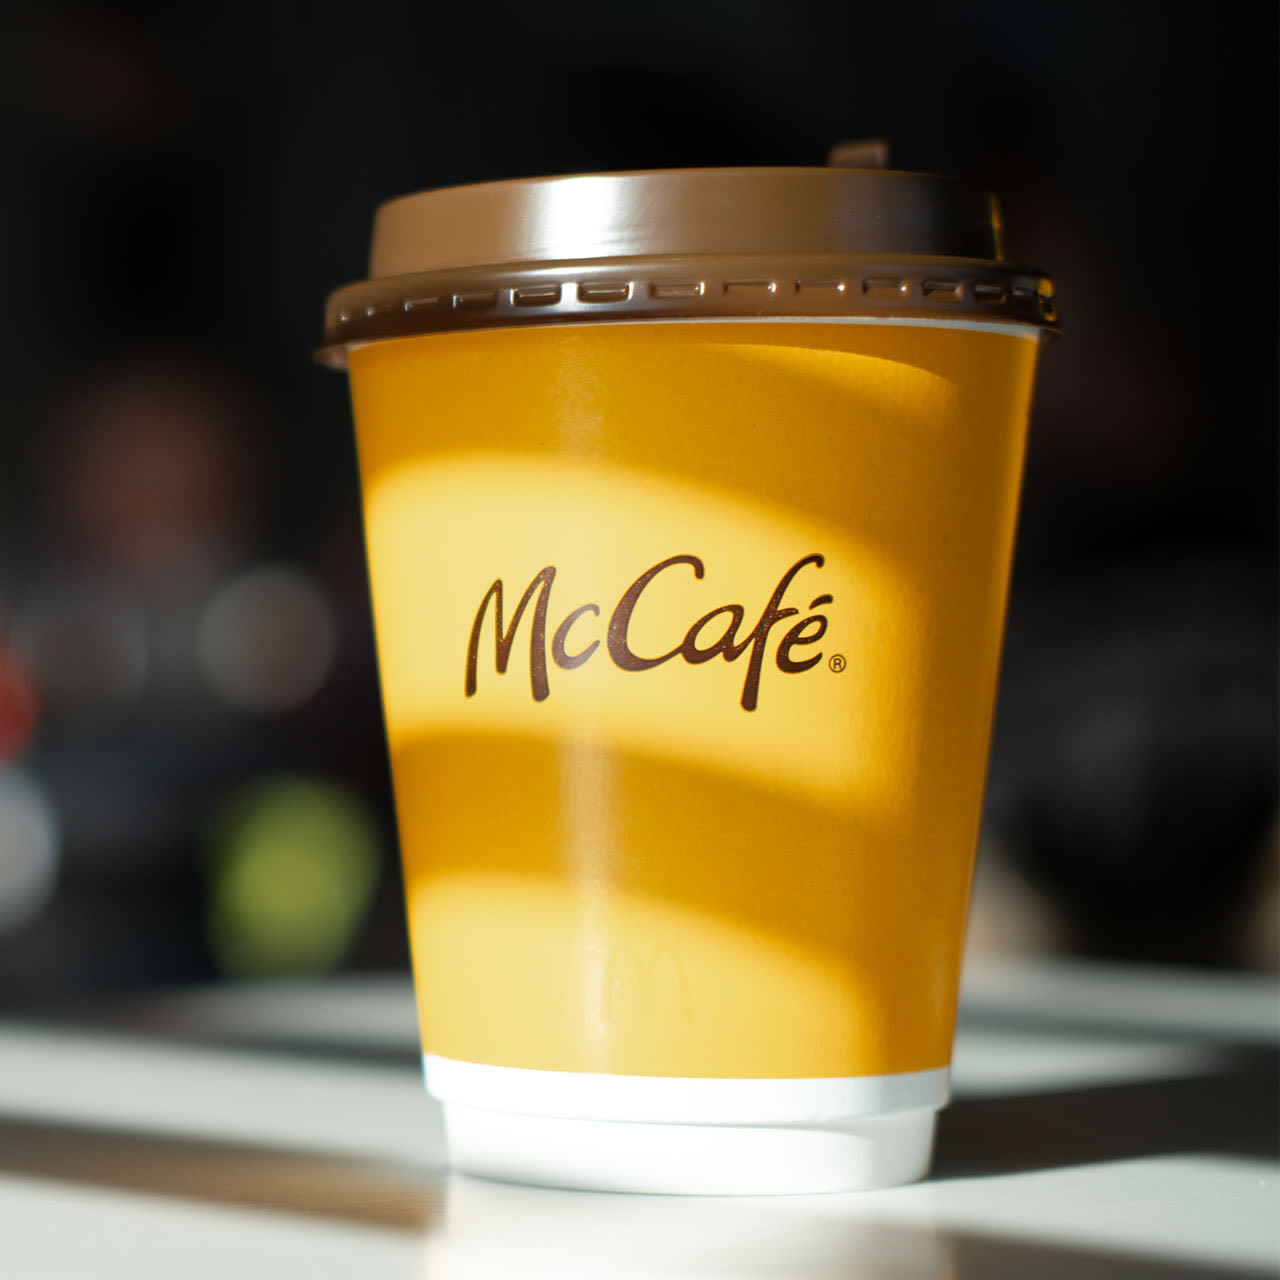 A McDonald’s Worker Warns Why Customers Should Skip McCafé Drinks From The Coffee Machines: ‘The Insides Are...